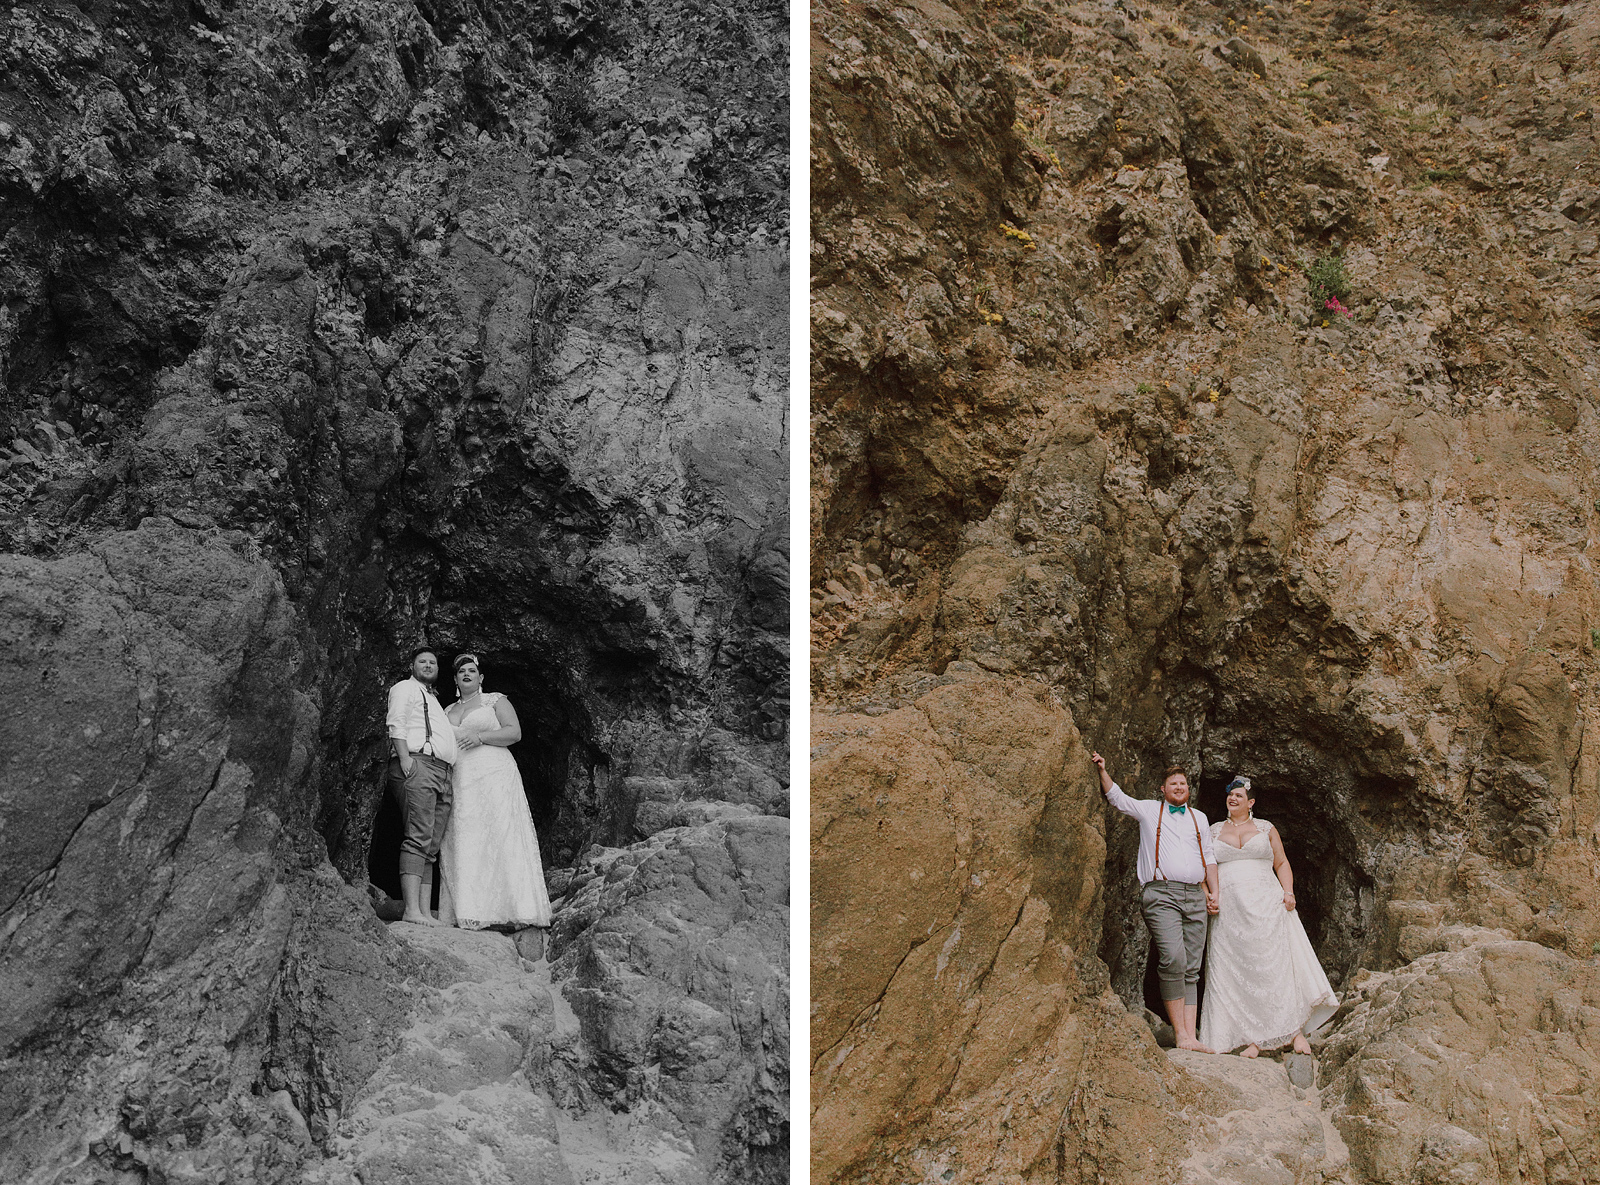 Portraits of the bride and groom standing in front of a cave entrance - Oceanside Community Club Wedding